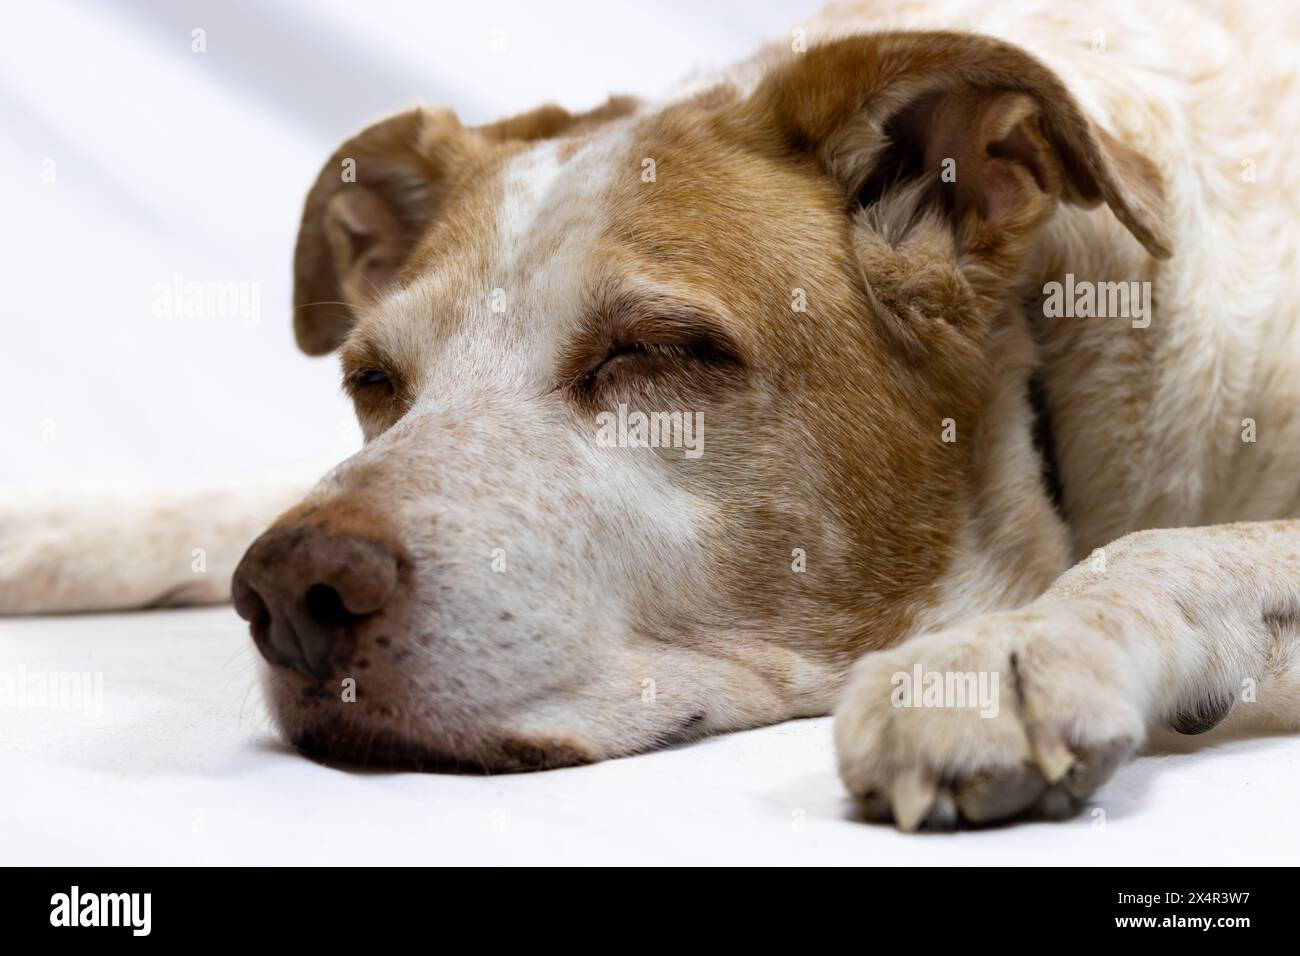 This image captures a serene moment of an older dog sleeping peacefully. Stock Photo